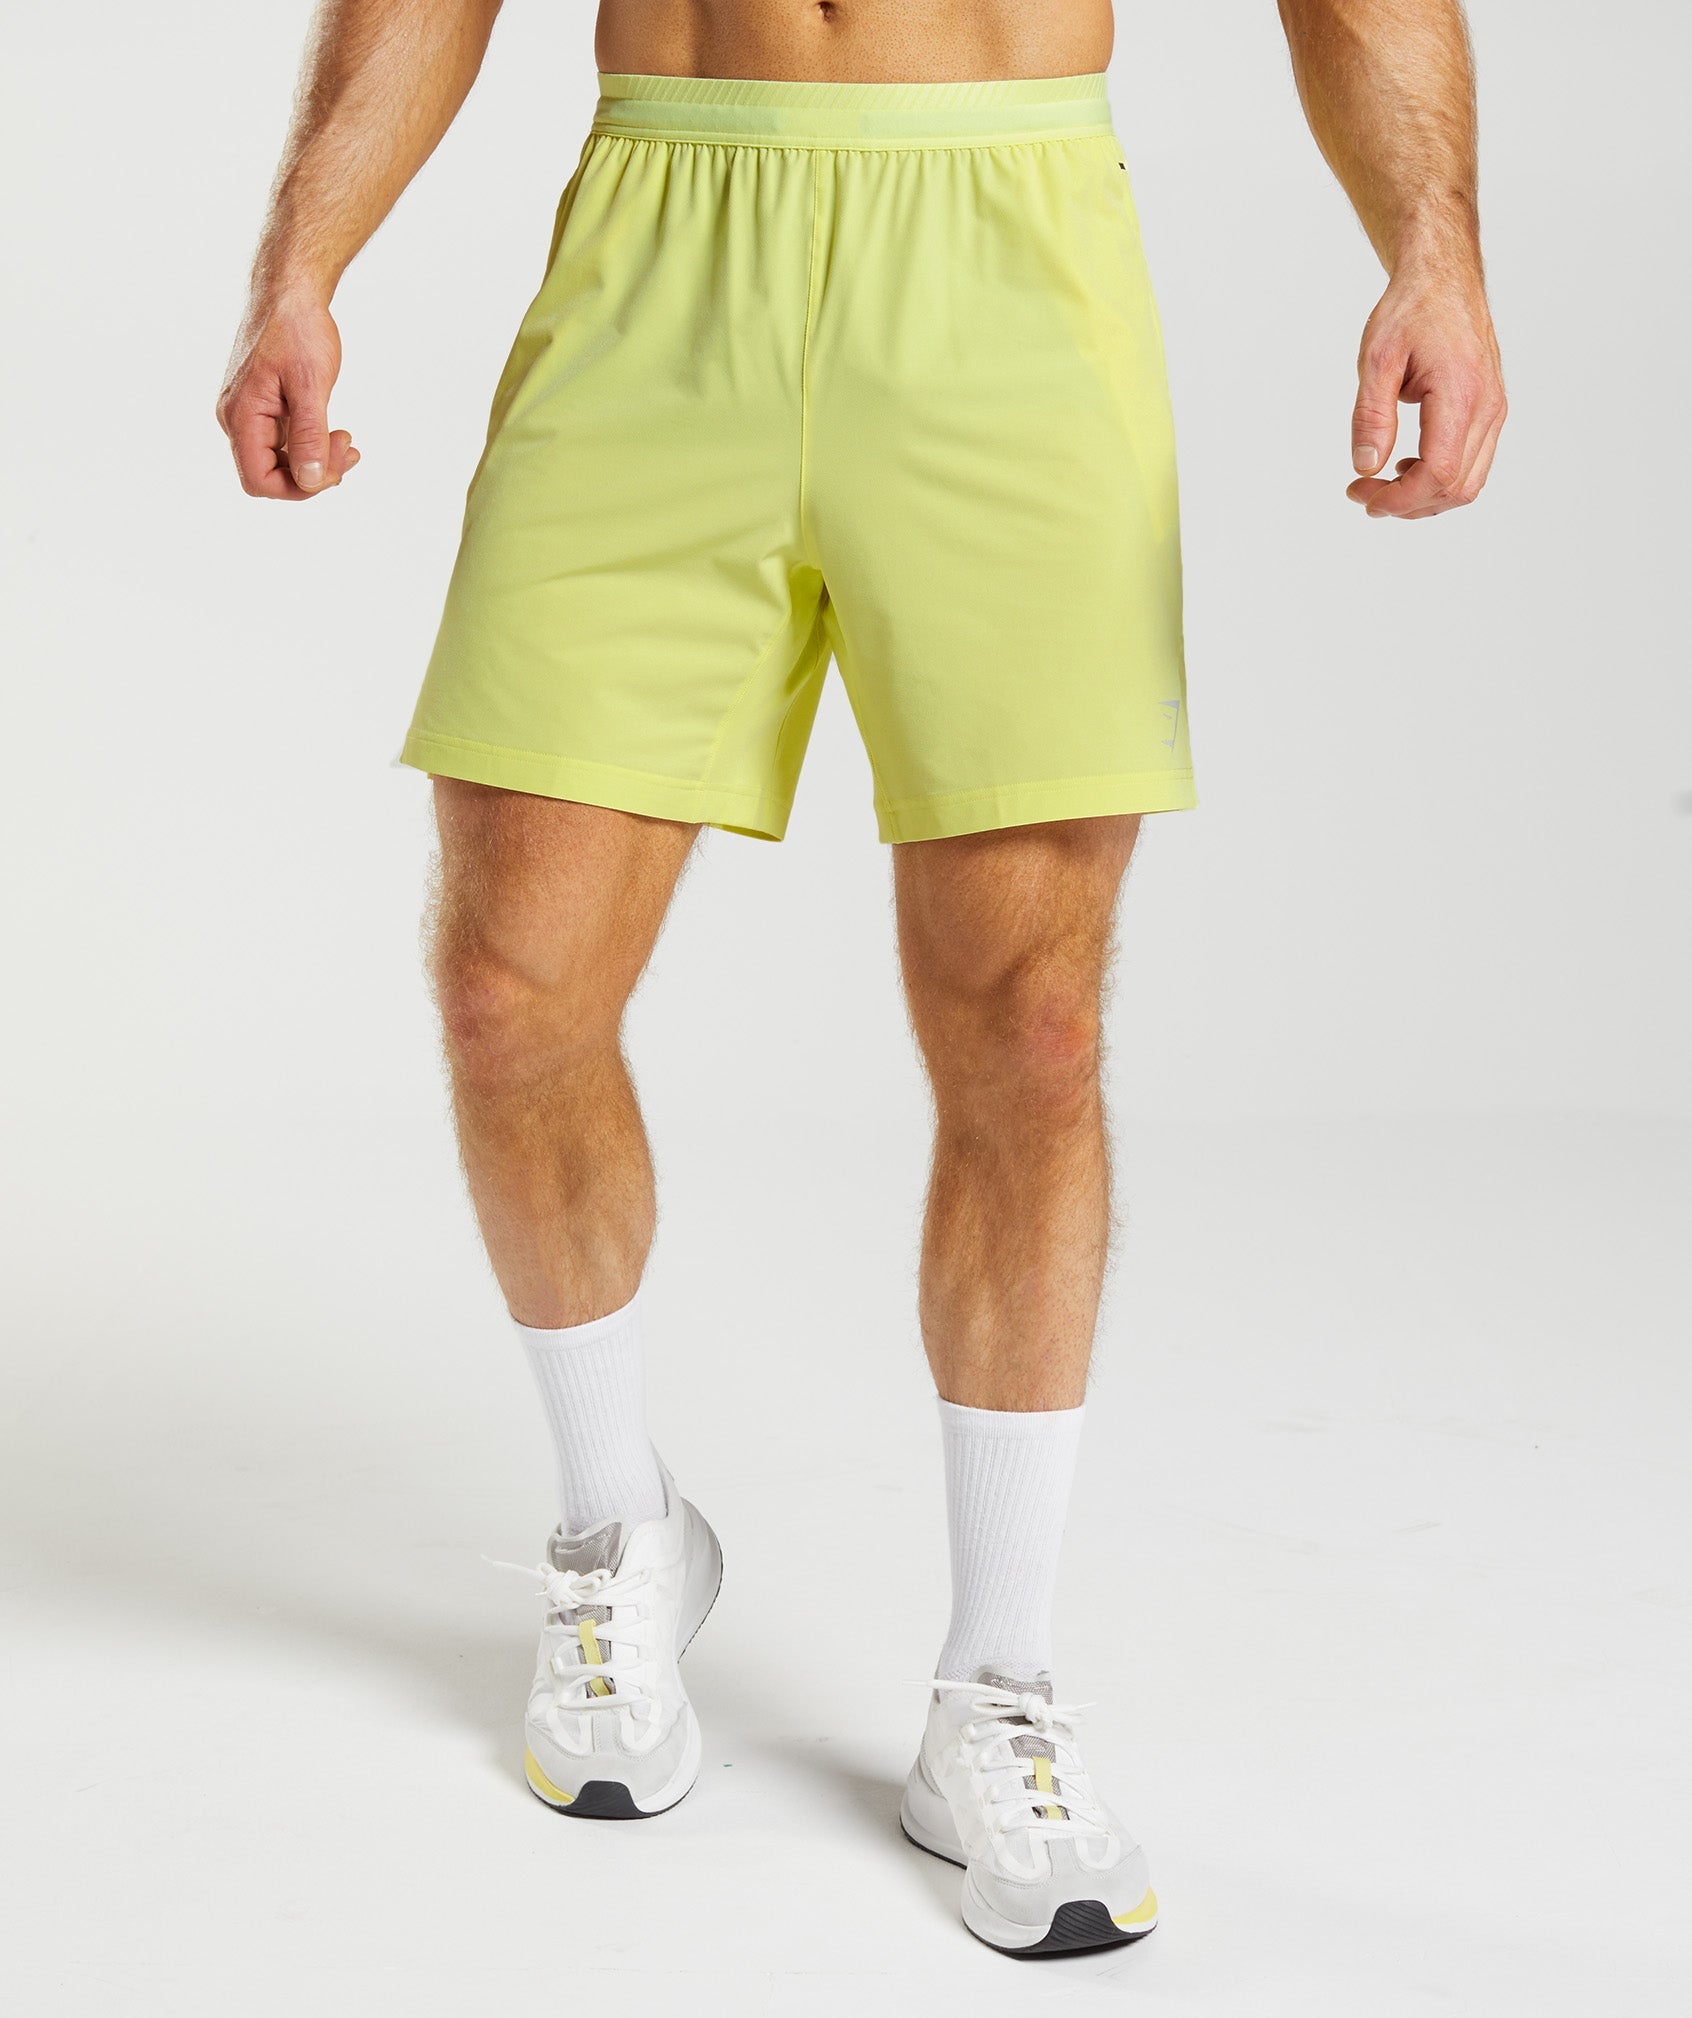 Apex 7" Hybrid Shorts in Firefly Green - view 1